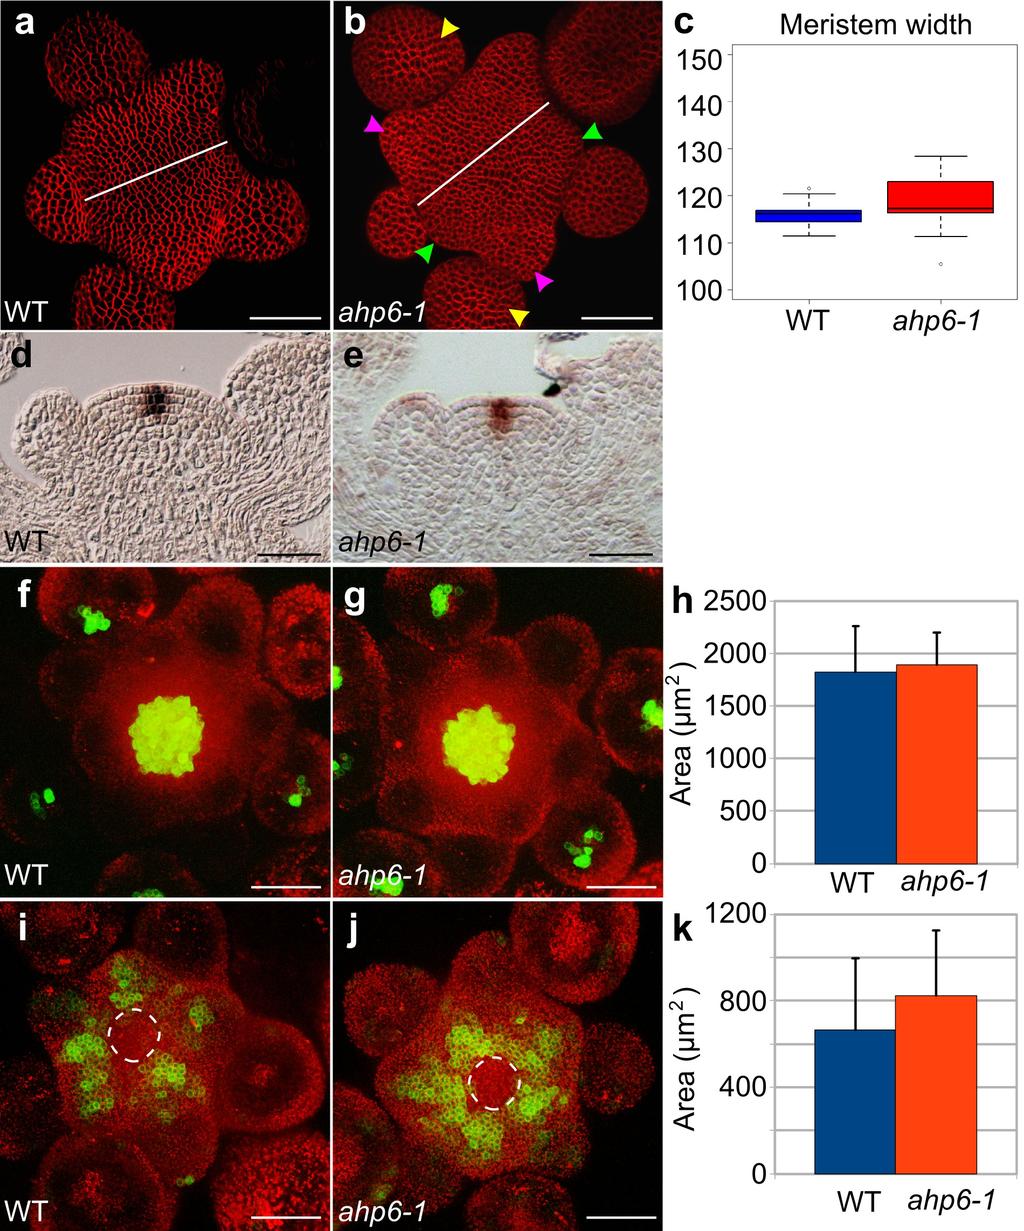 RESEARCH SUPPLEMENTARY INFORMATION Supplementary Figure 6. The size of the meristem and of the stem cell niche are not affected by the ahp6 mutation.